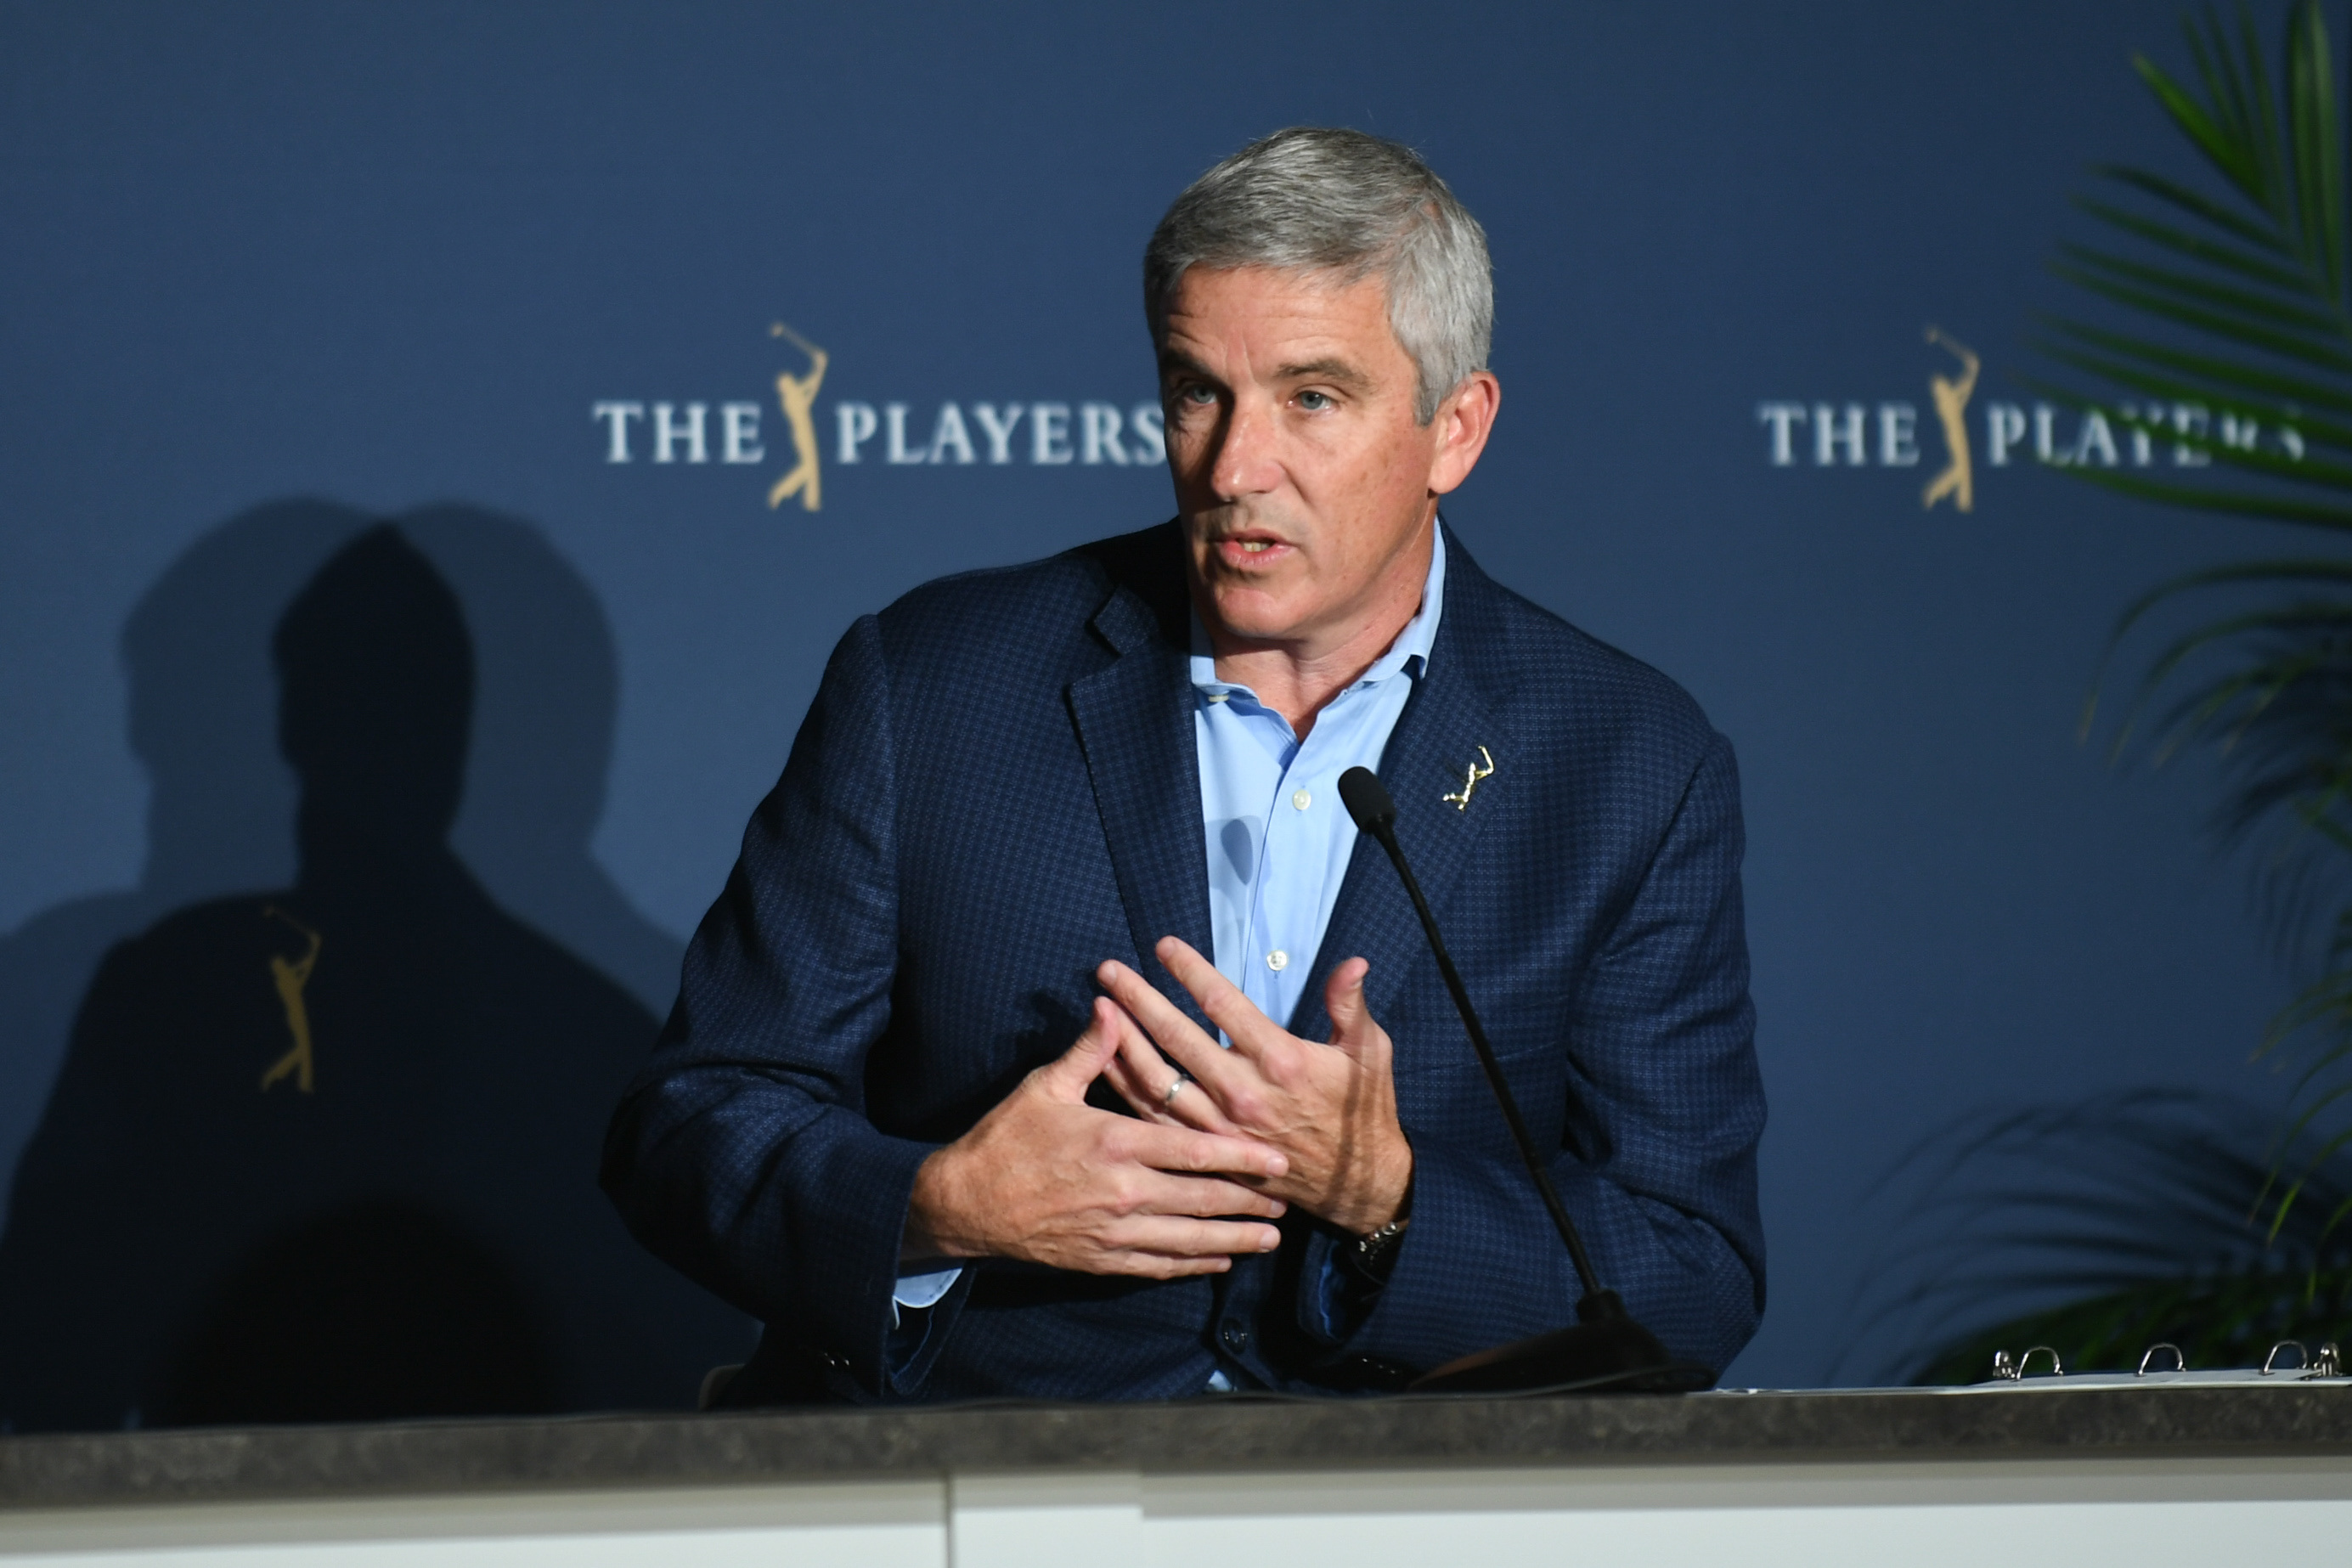 PGA: THE PLAYERS Championship - Press Conference